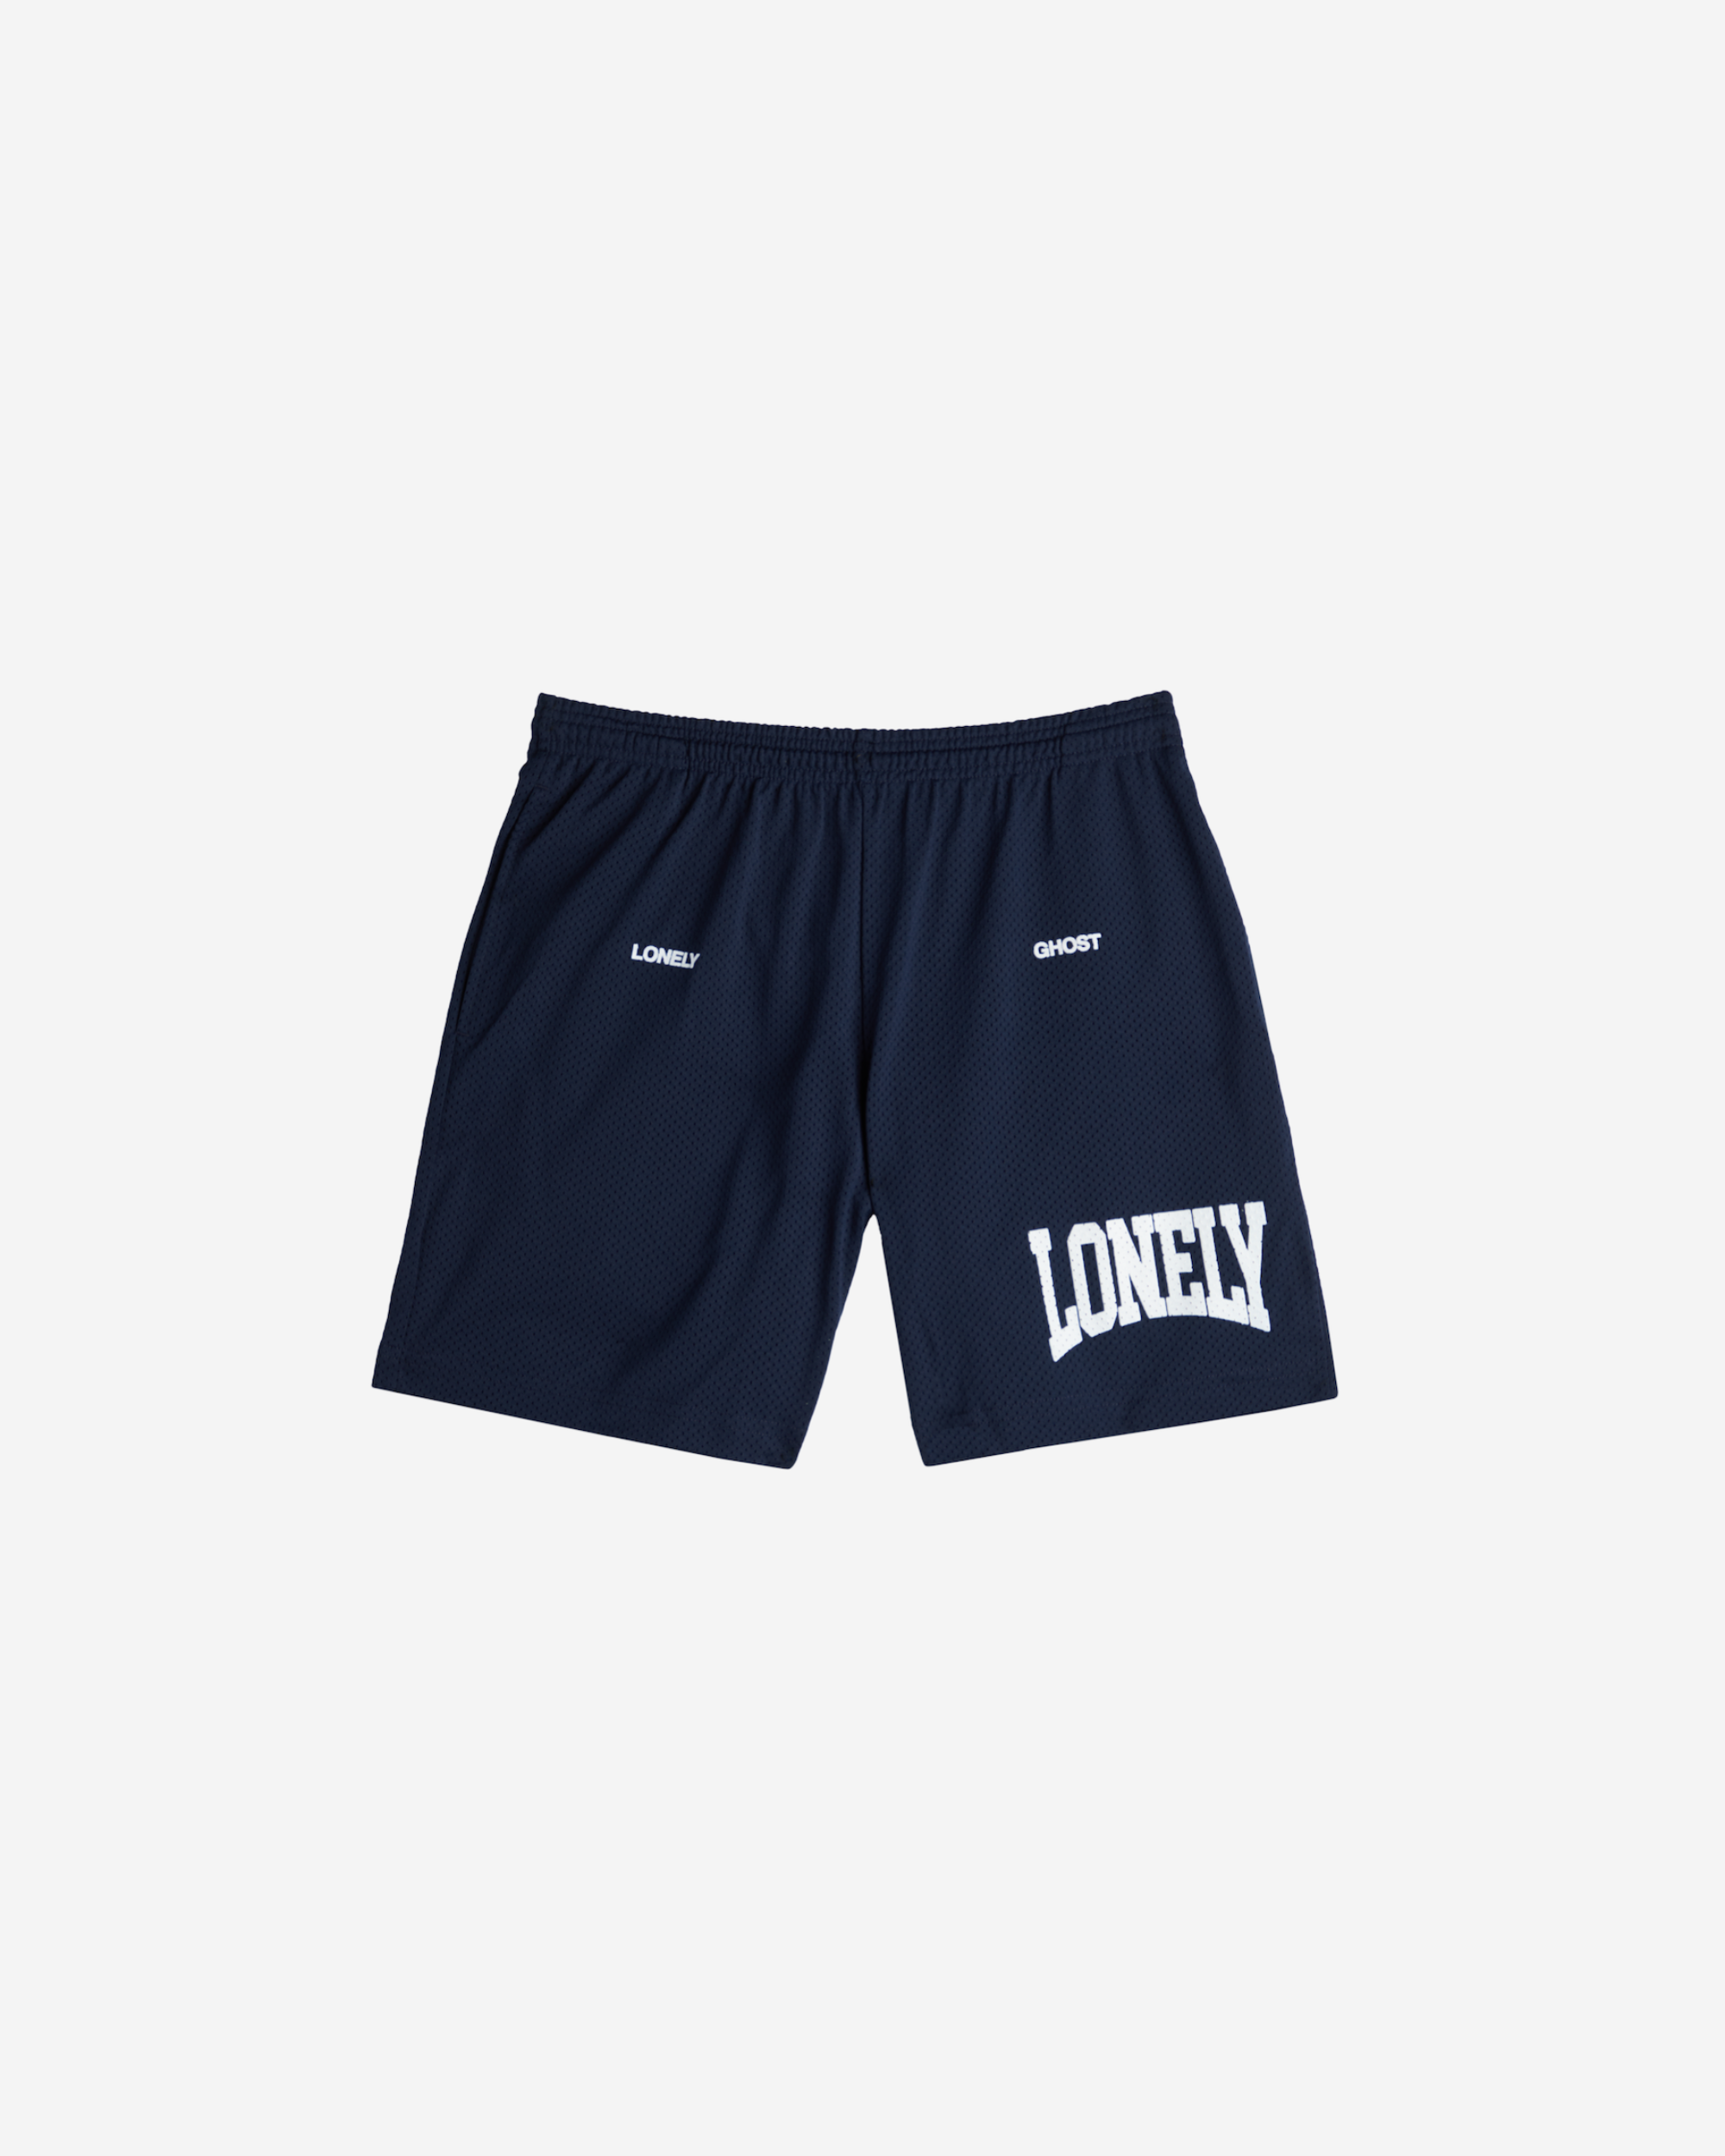 Lonely Mesh Shorts